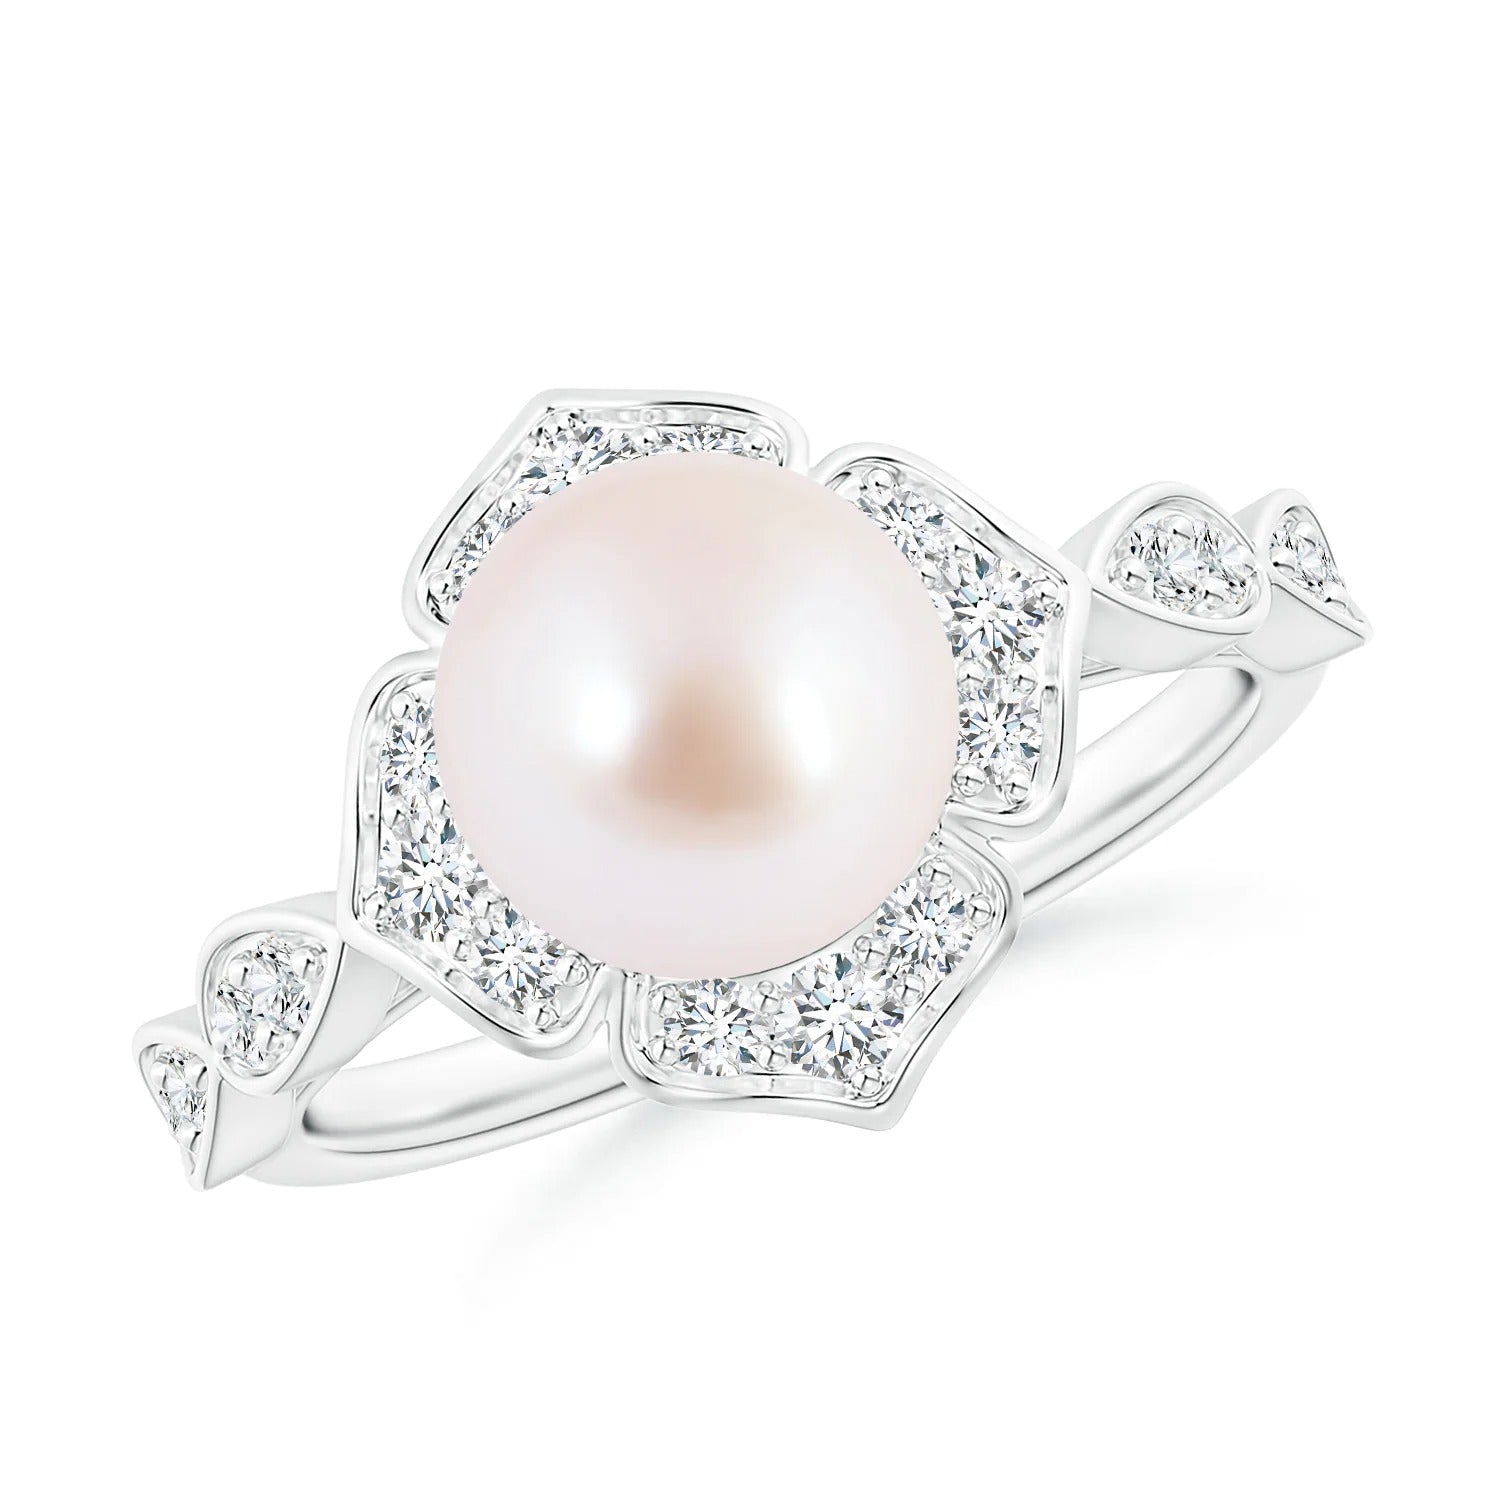 Close up view of Floral Vintage Inspired Japanese Akoya Pearl Engagement Ring